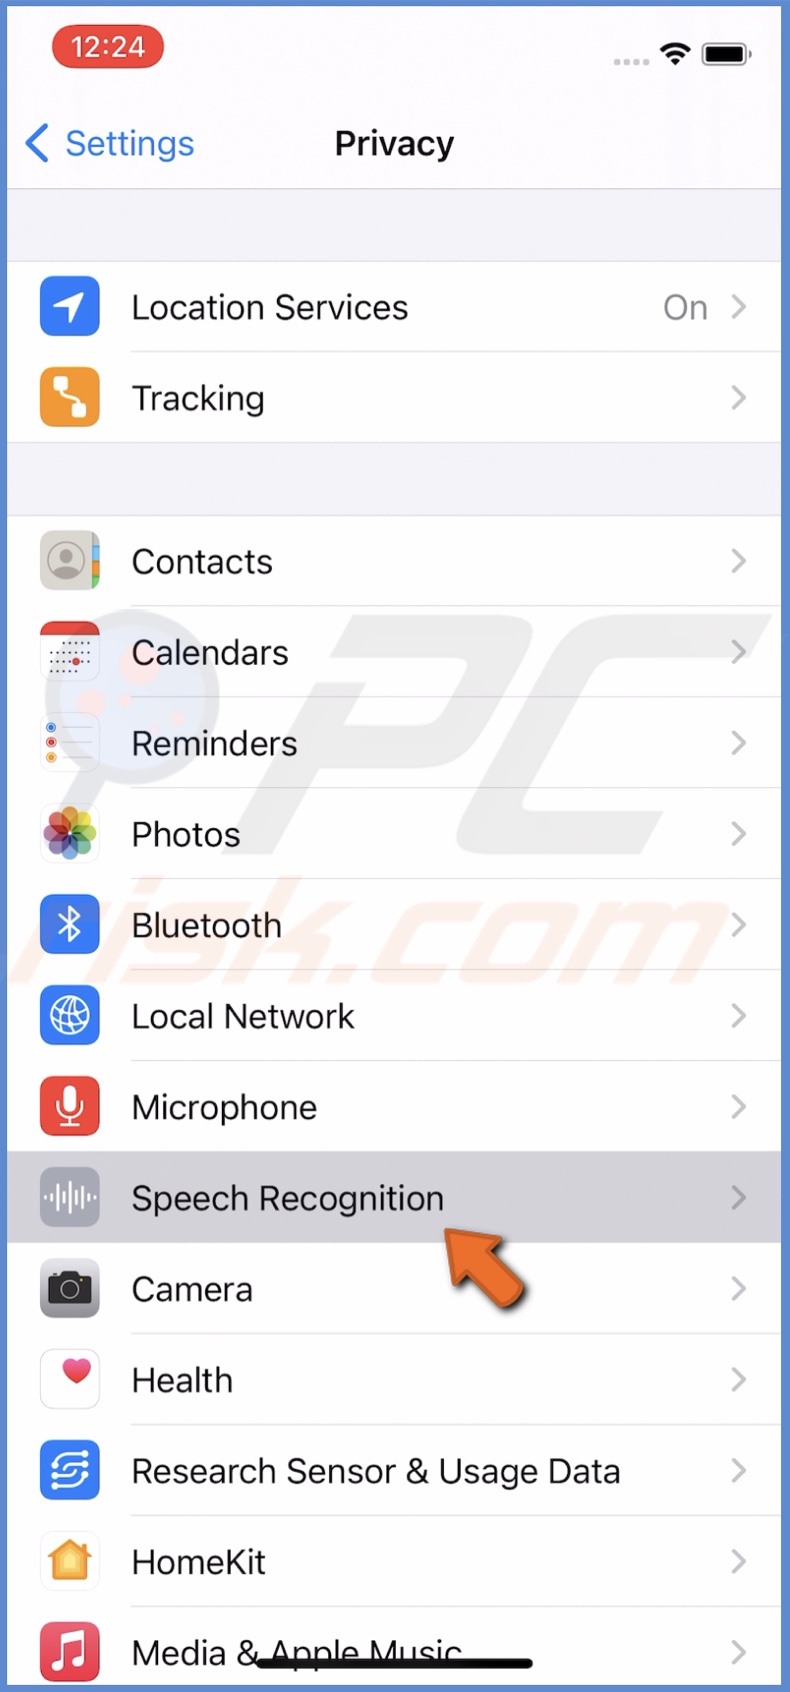 Tap on Speech Recognition